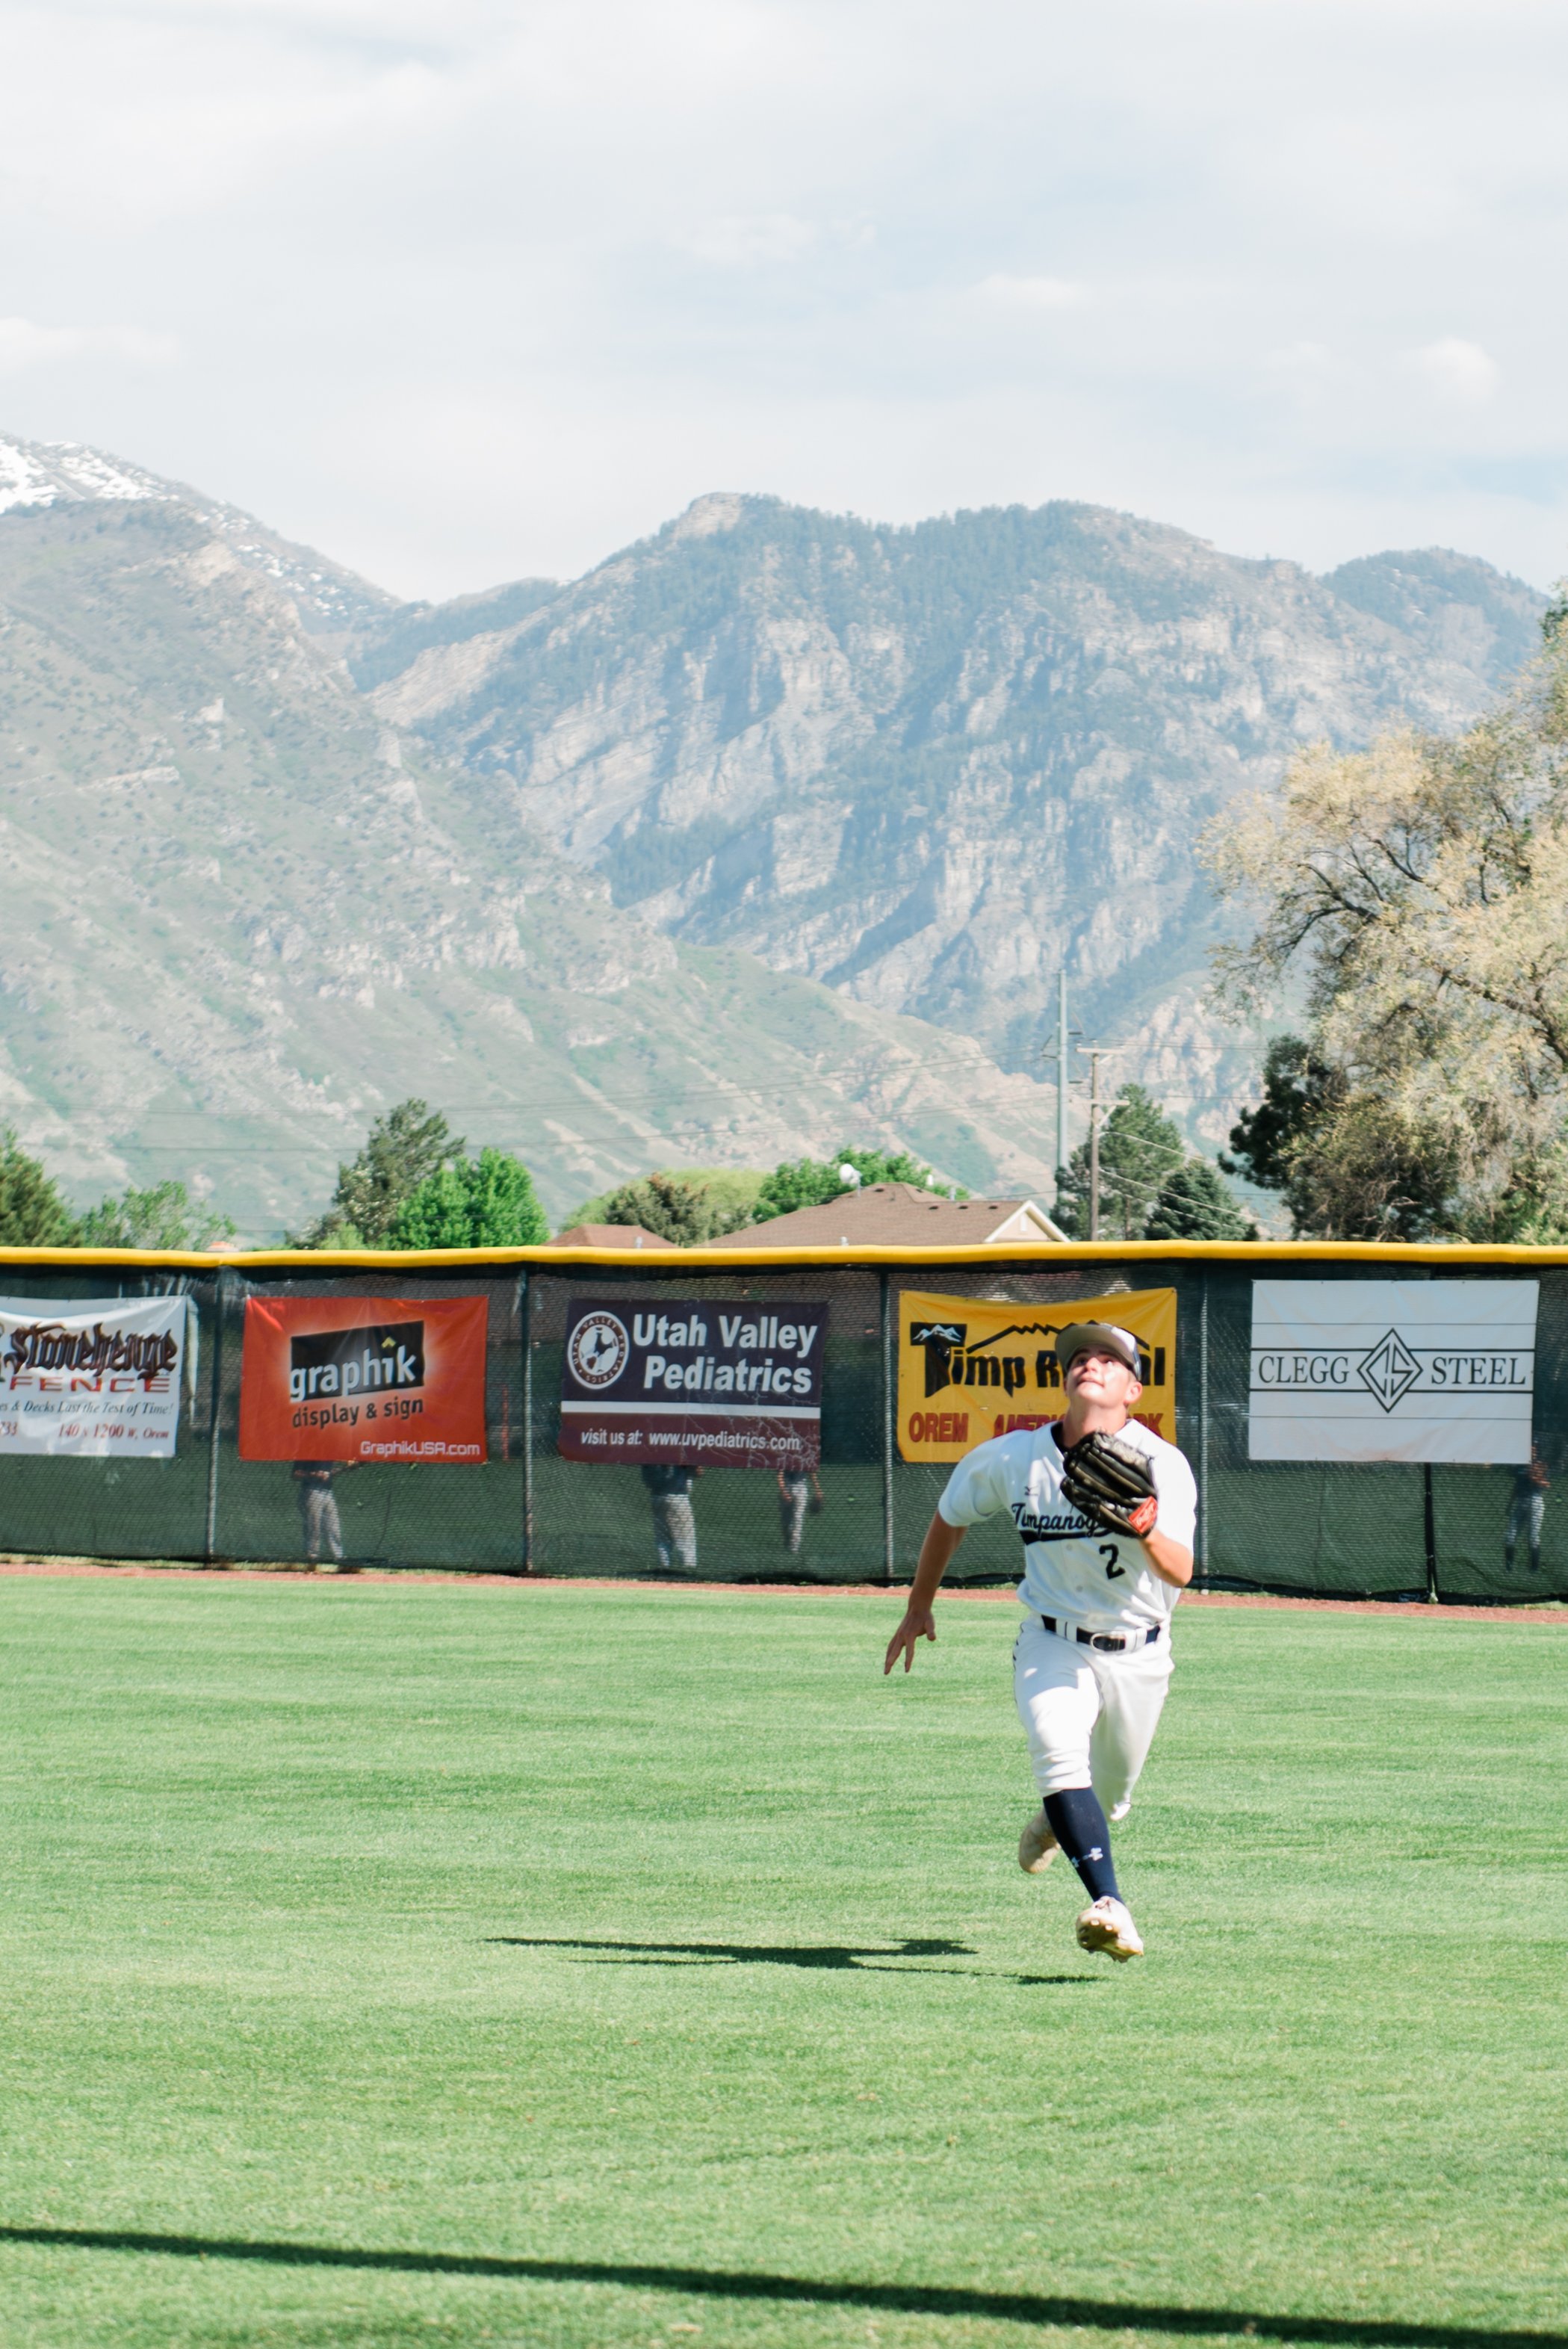  The majestic mountains are the background of this action photo of a young boy midstride in a summer baseball game. Baseball mountains green baseball field sports action shot #baseball #youthsportphoto #baseballactionshot #mountainbackground #georgia